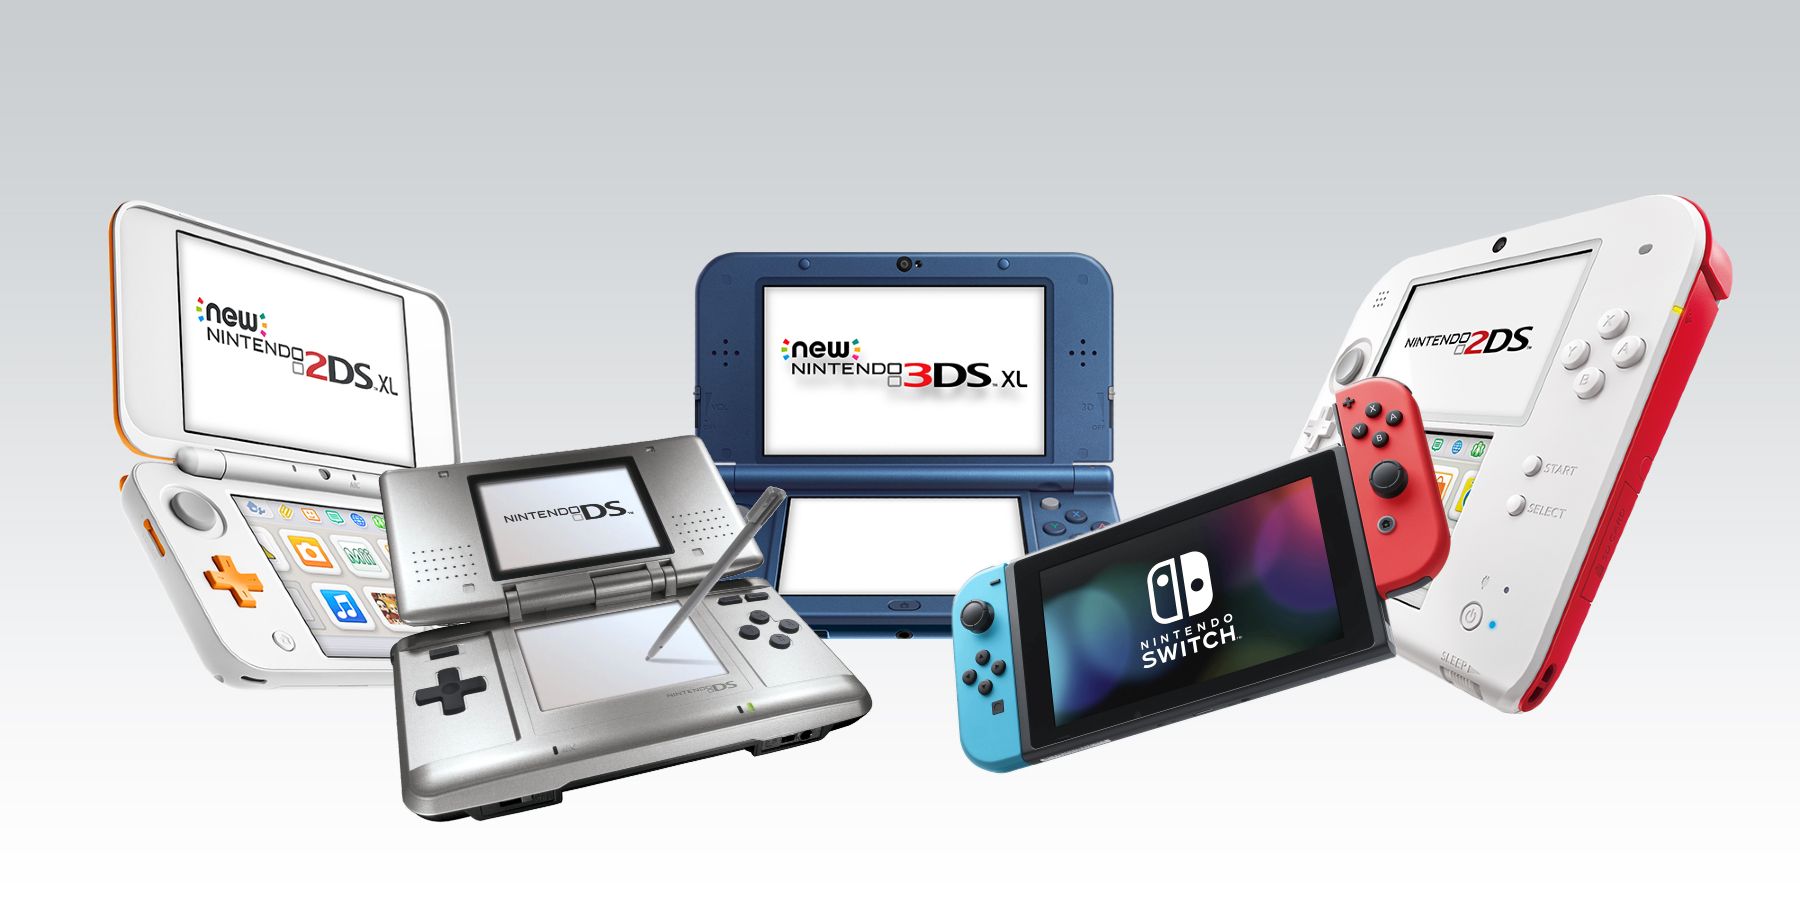 Why Another Nintendo Handheld With Dual Screens Would Be Worthwhile